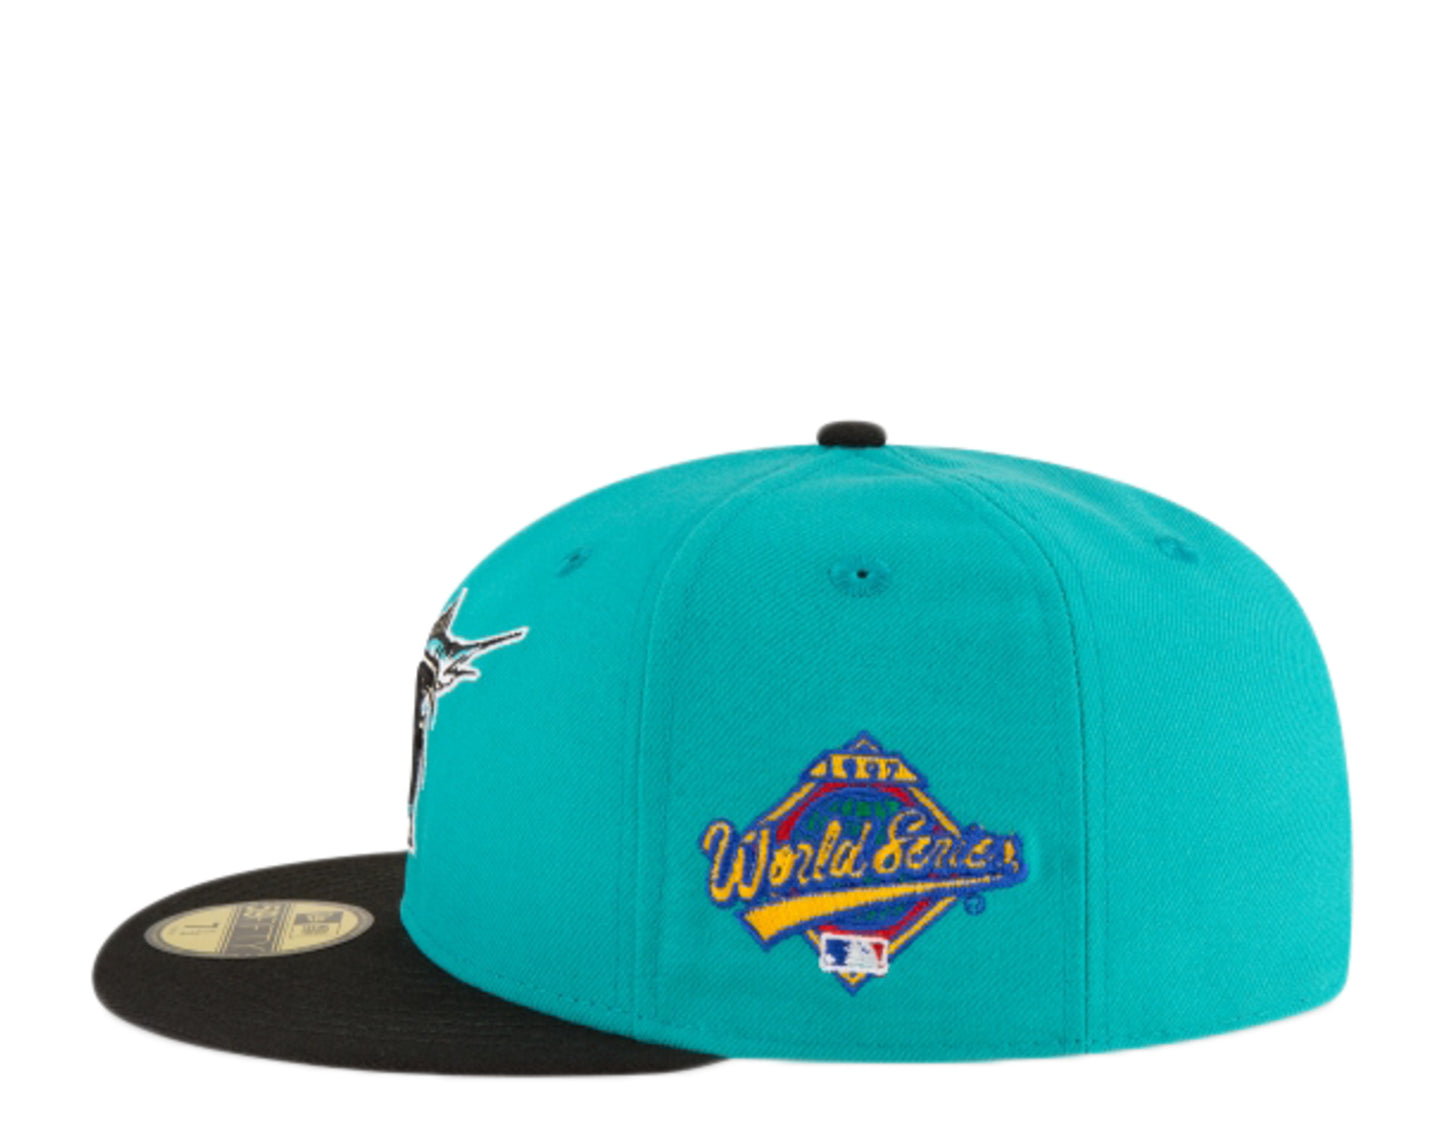 New Era 59Fifty MLB Florida Marlins 1997 World Series Teal Fitted Hat 11783654